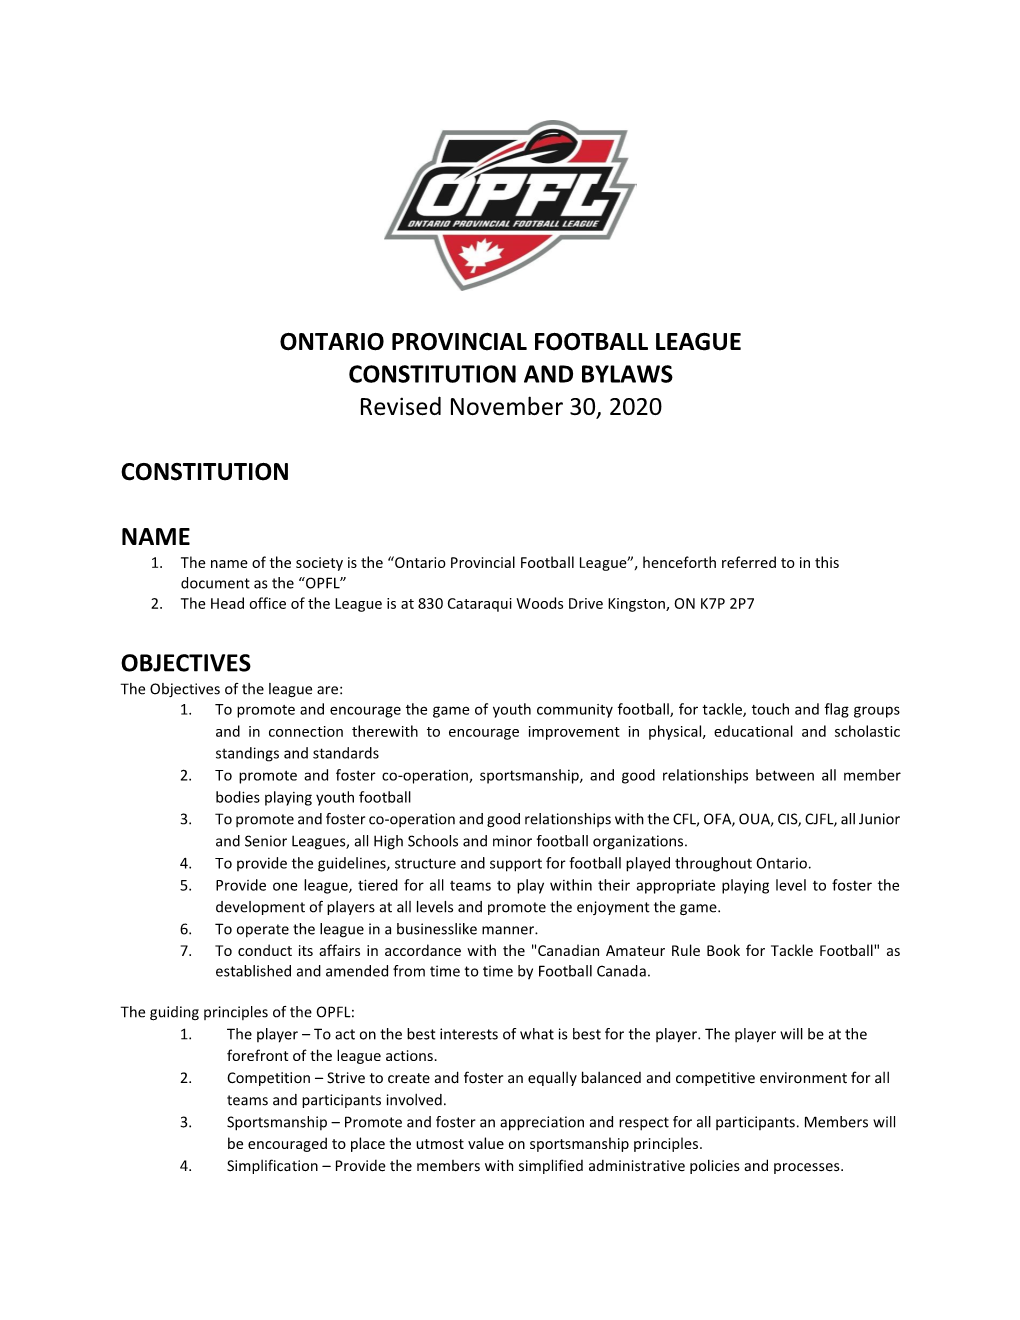 ONTARIO PROVINCIAL FOOTBALL LEAGUE CONSTITUTION and BYLAWS Revised November 30, 2020